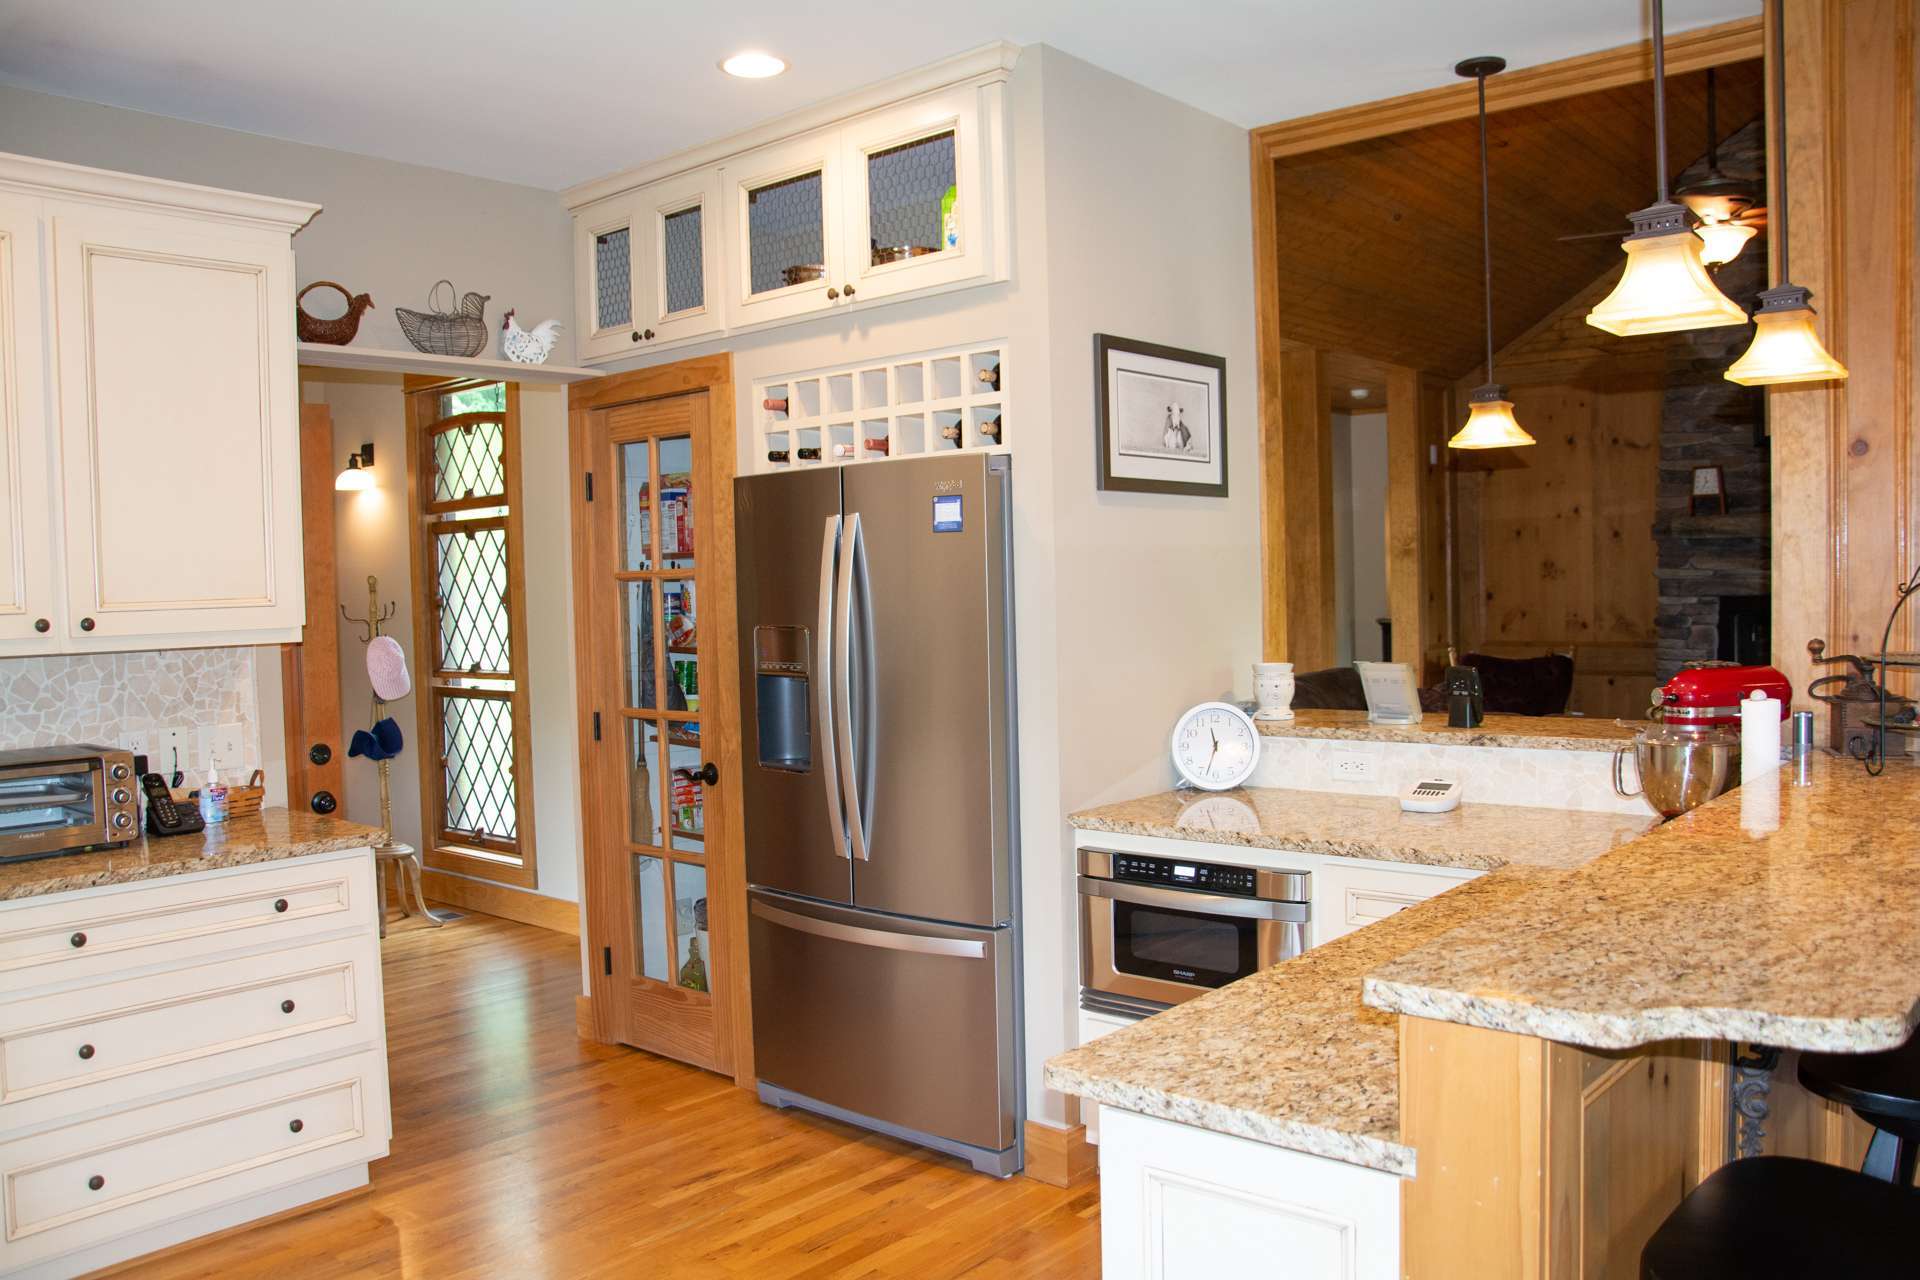 You will appreciate the work and storage space in the kitchen.